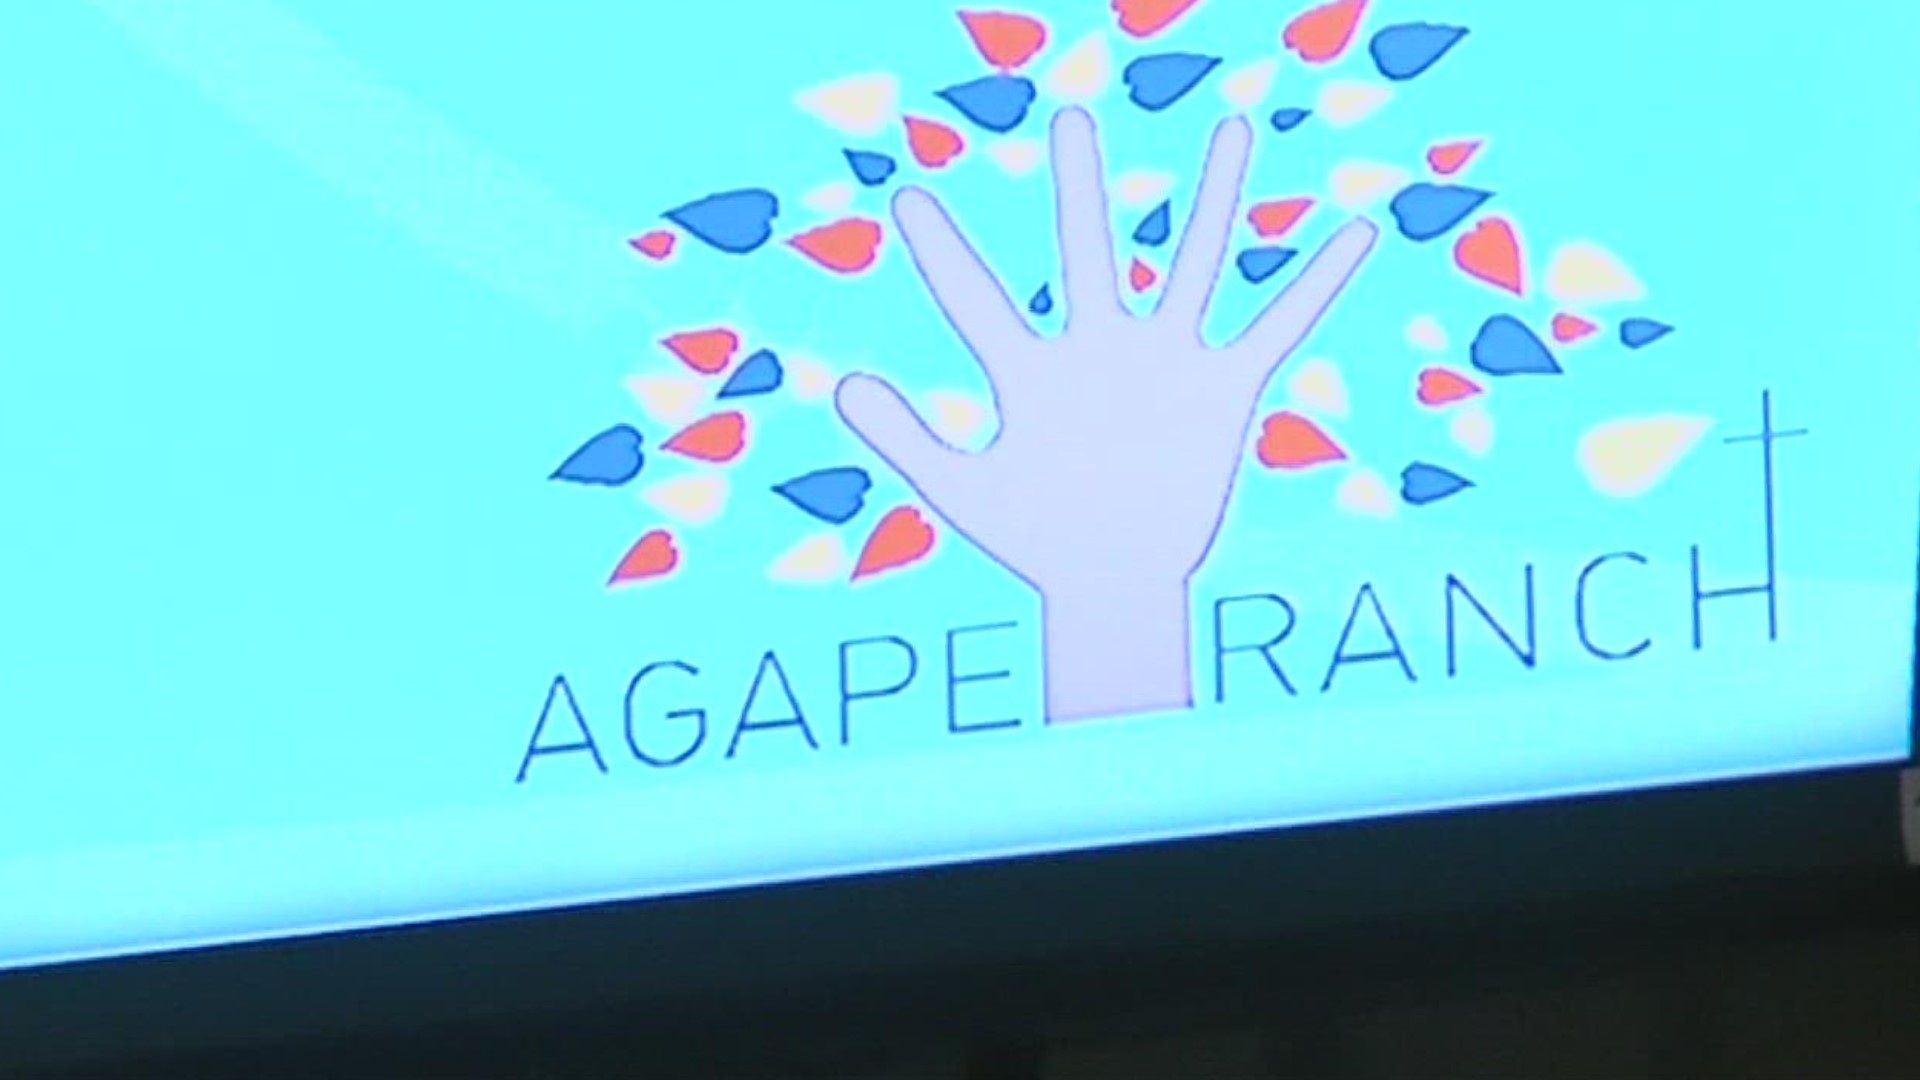 Agape Ranch is a "neighborhood complete with homes, playgrounds, rec areas, and onsite respite care providers to love and support foster children."